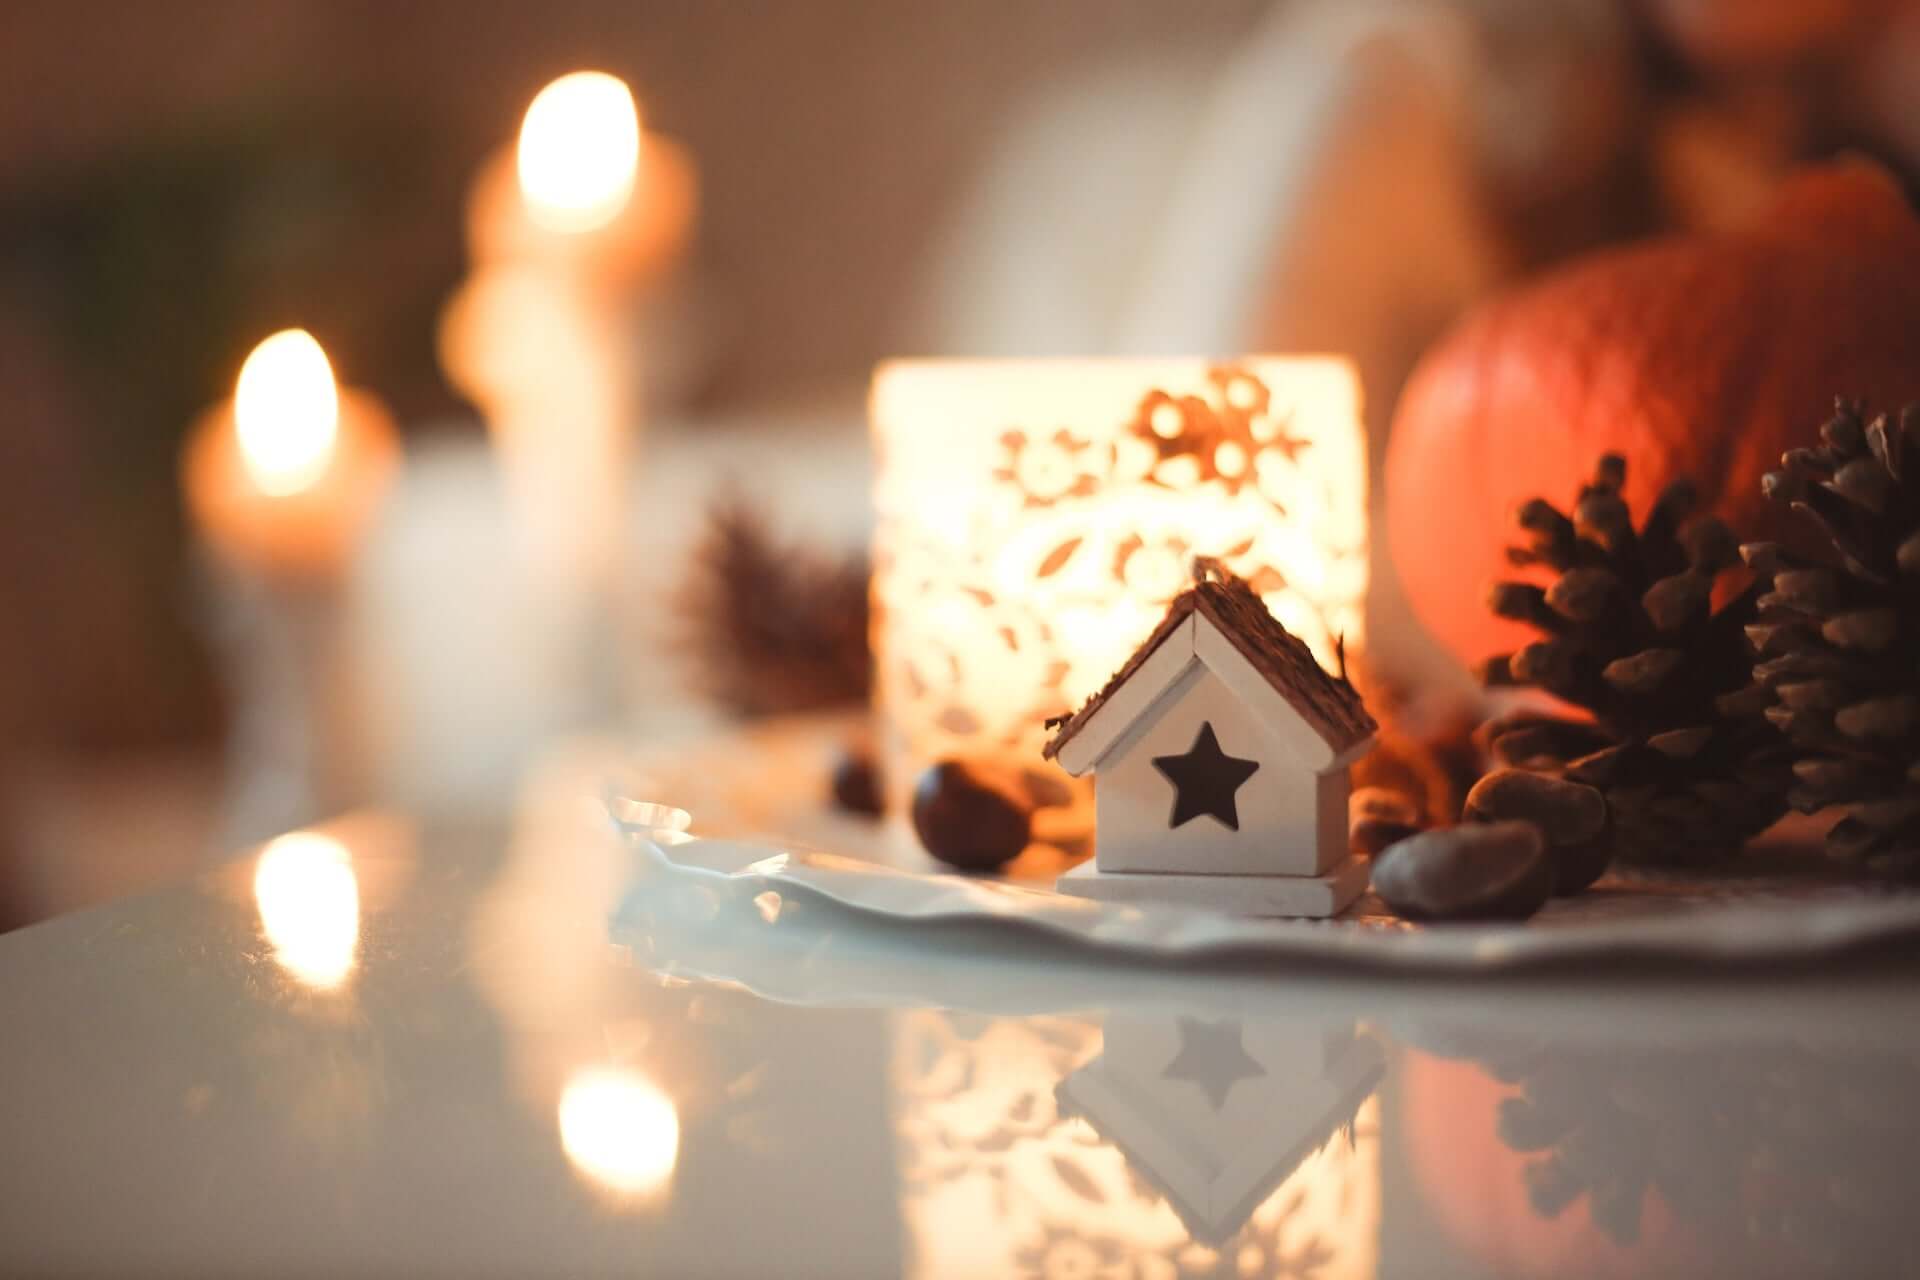 A table decorated with holiday items like pine cones, candles, baubles, and a small house ornament.